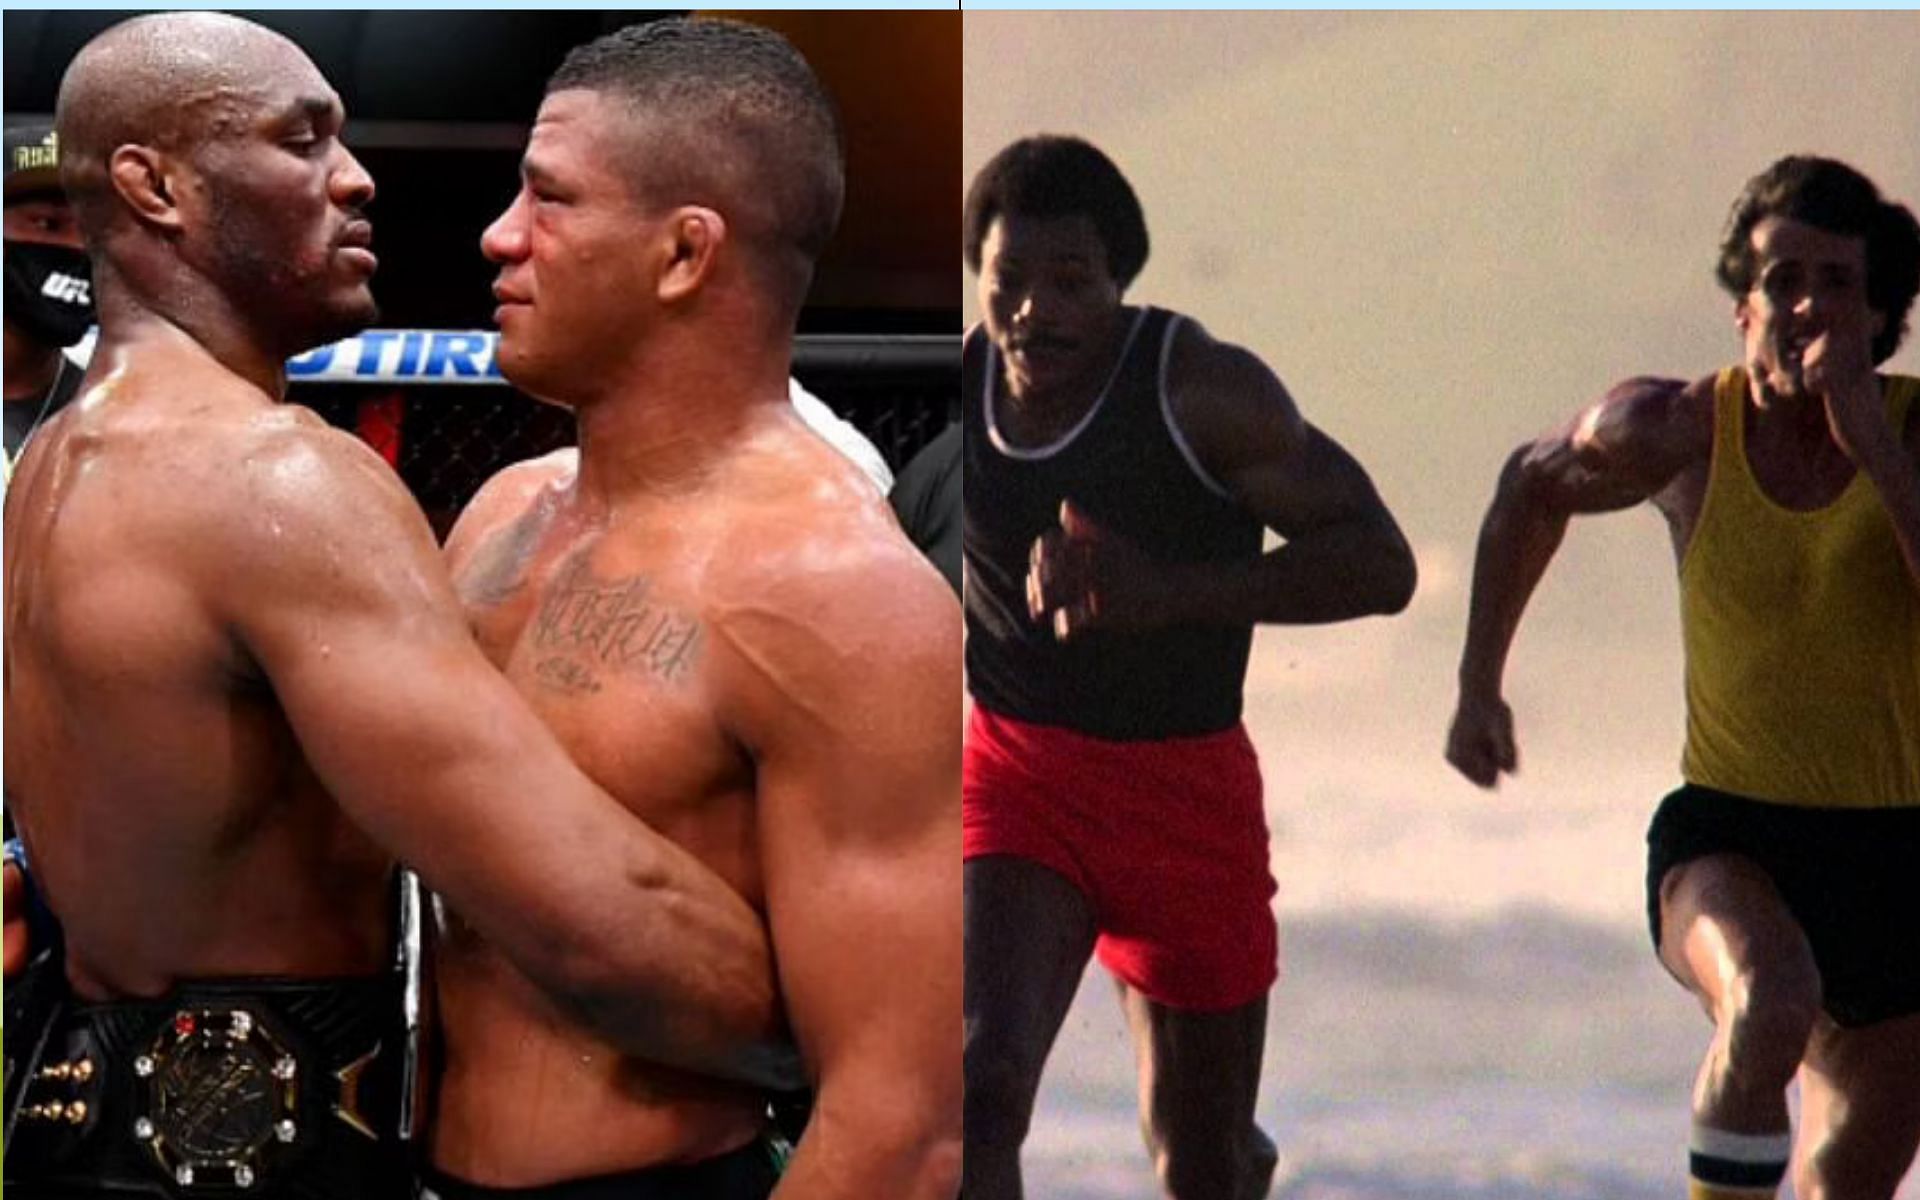 Kamaru Usman and Gilbert Burns have always been friends despite fighting one another [Right image credit - @Elaloren on Twitter]